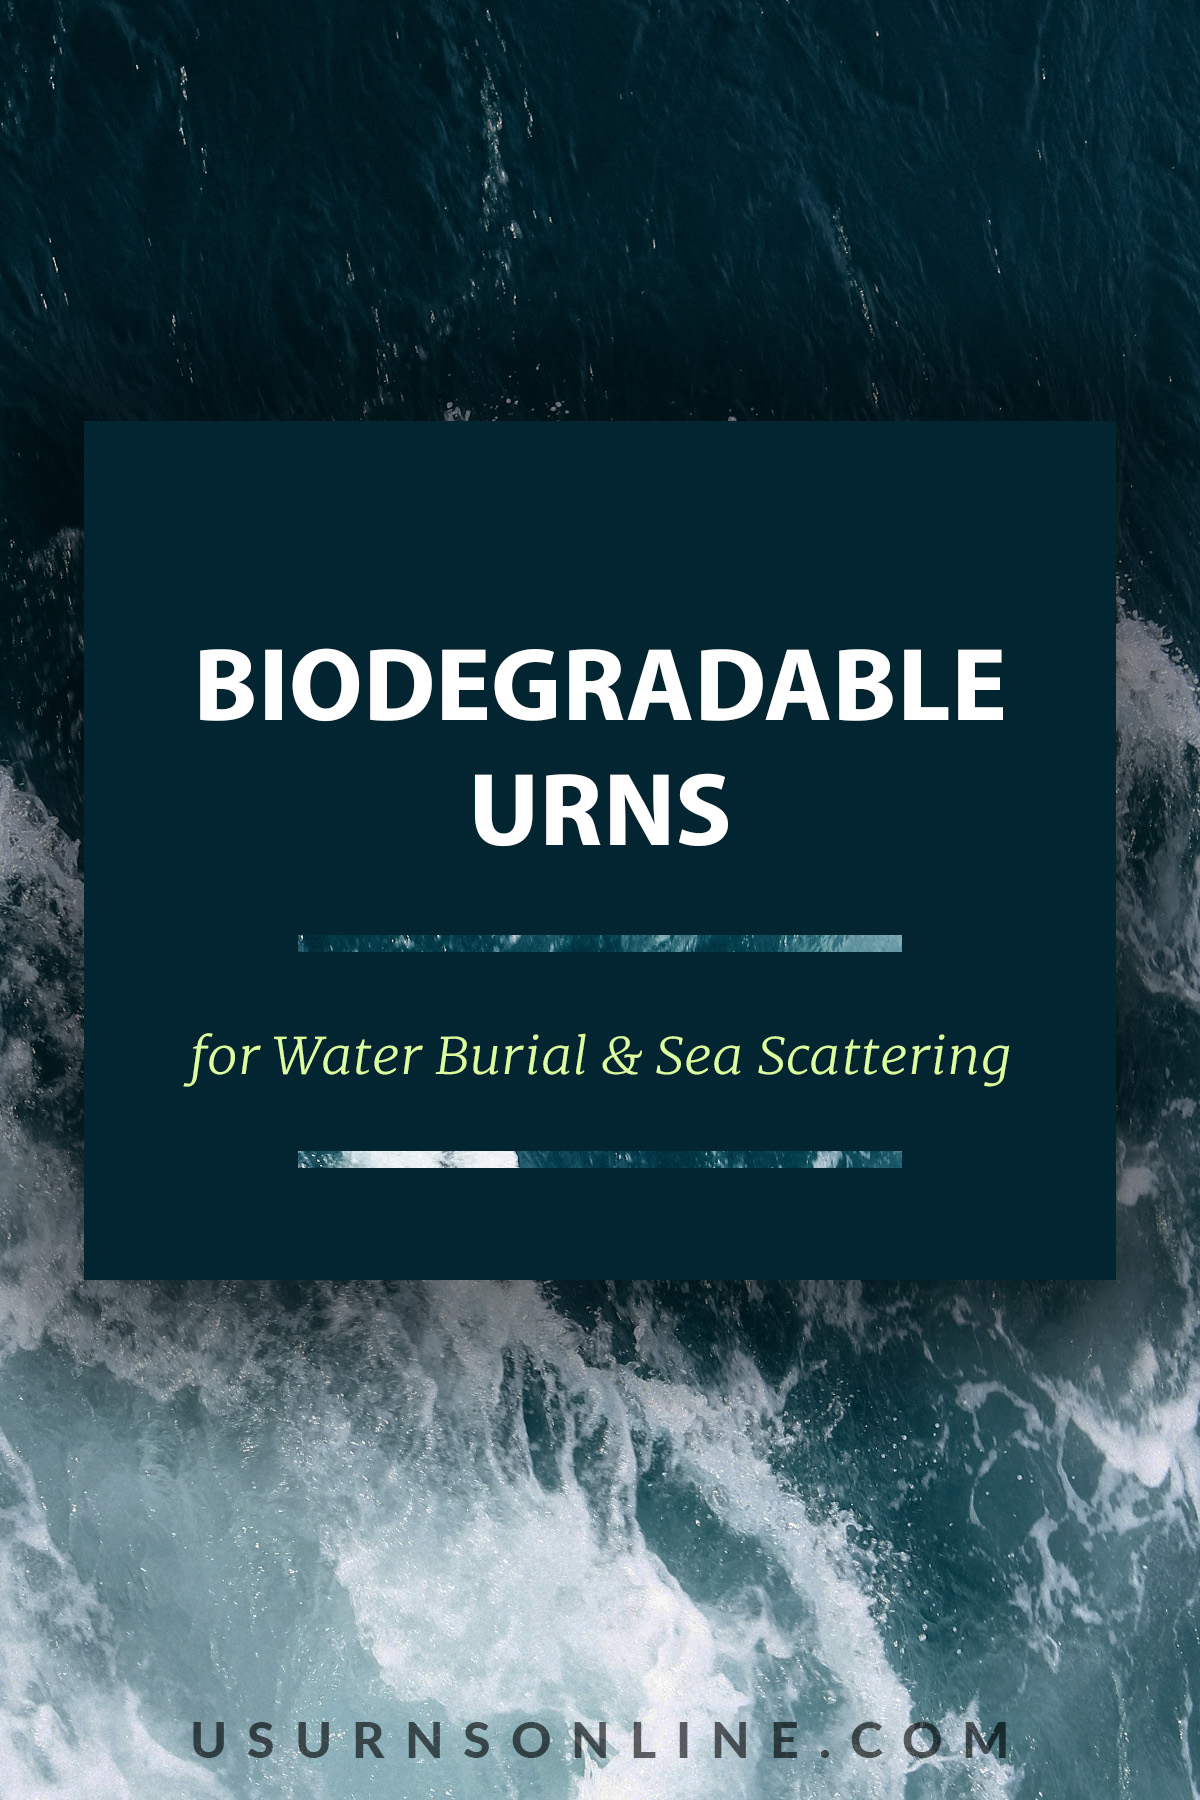 biodegradable urns for water burial - feature image